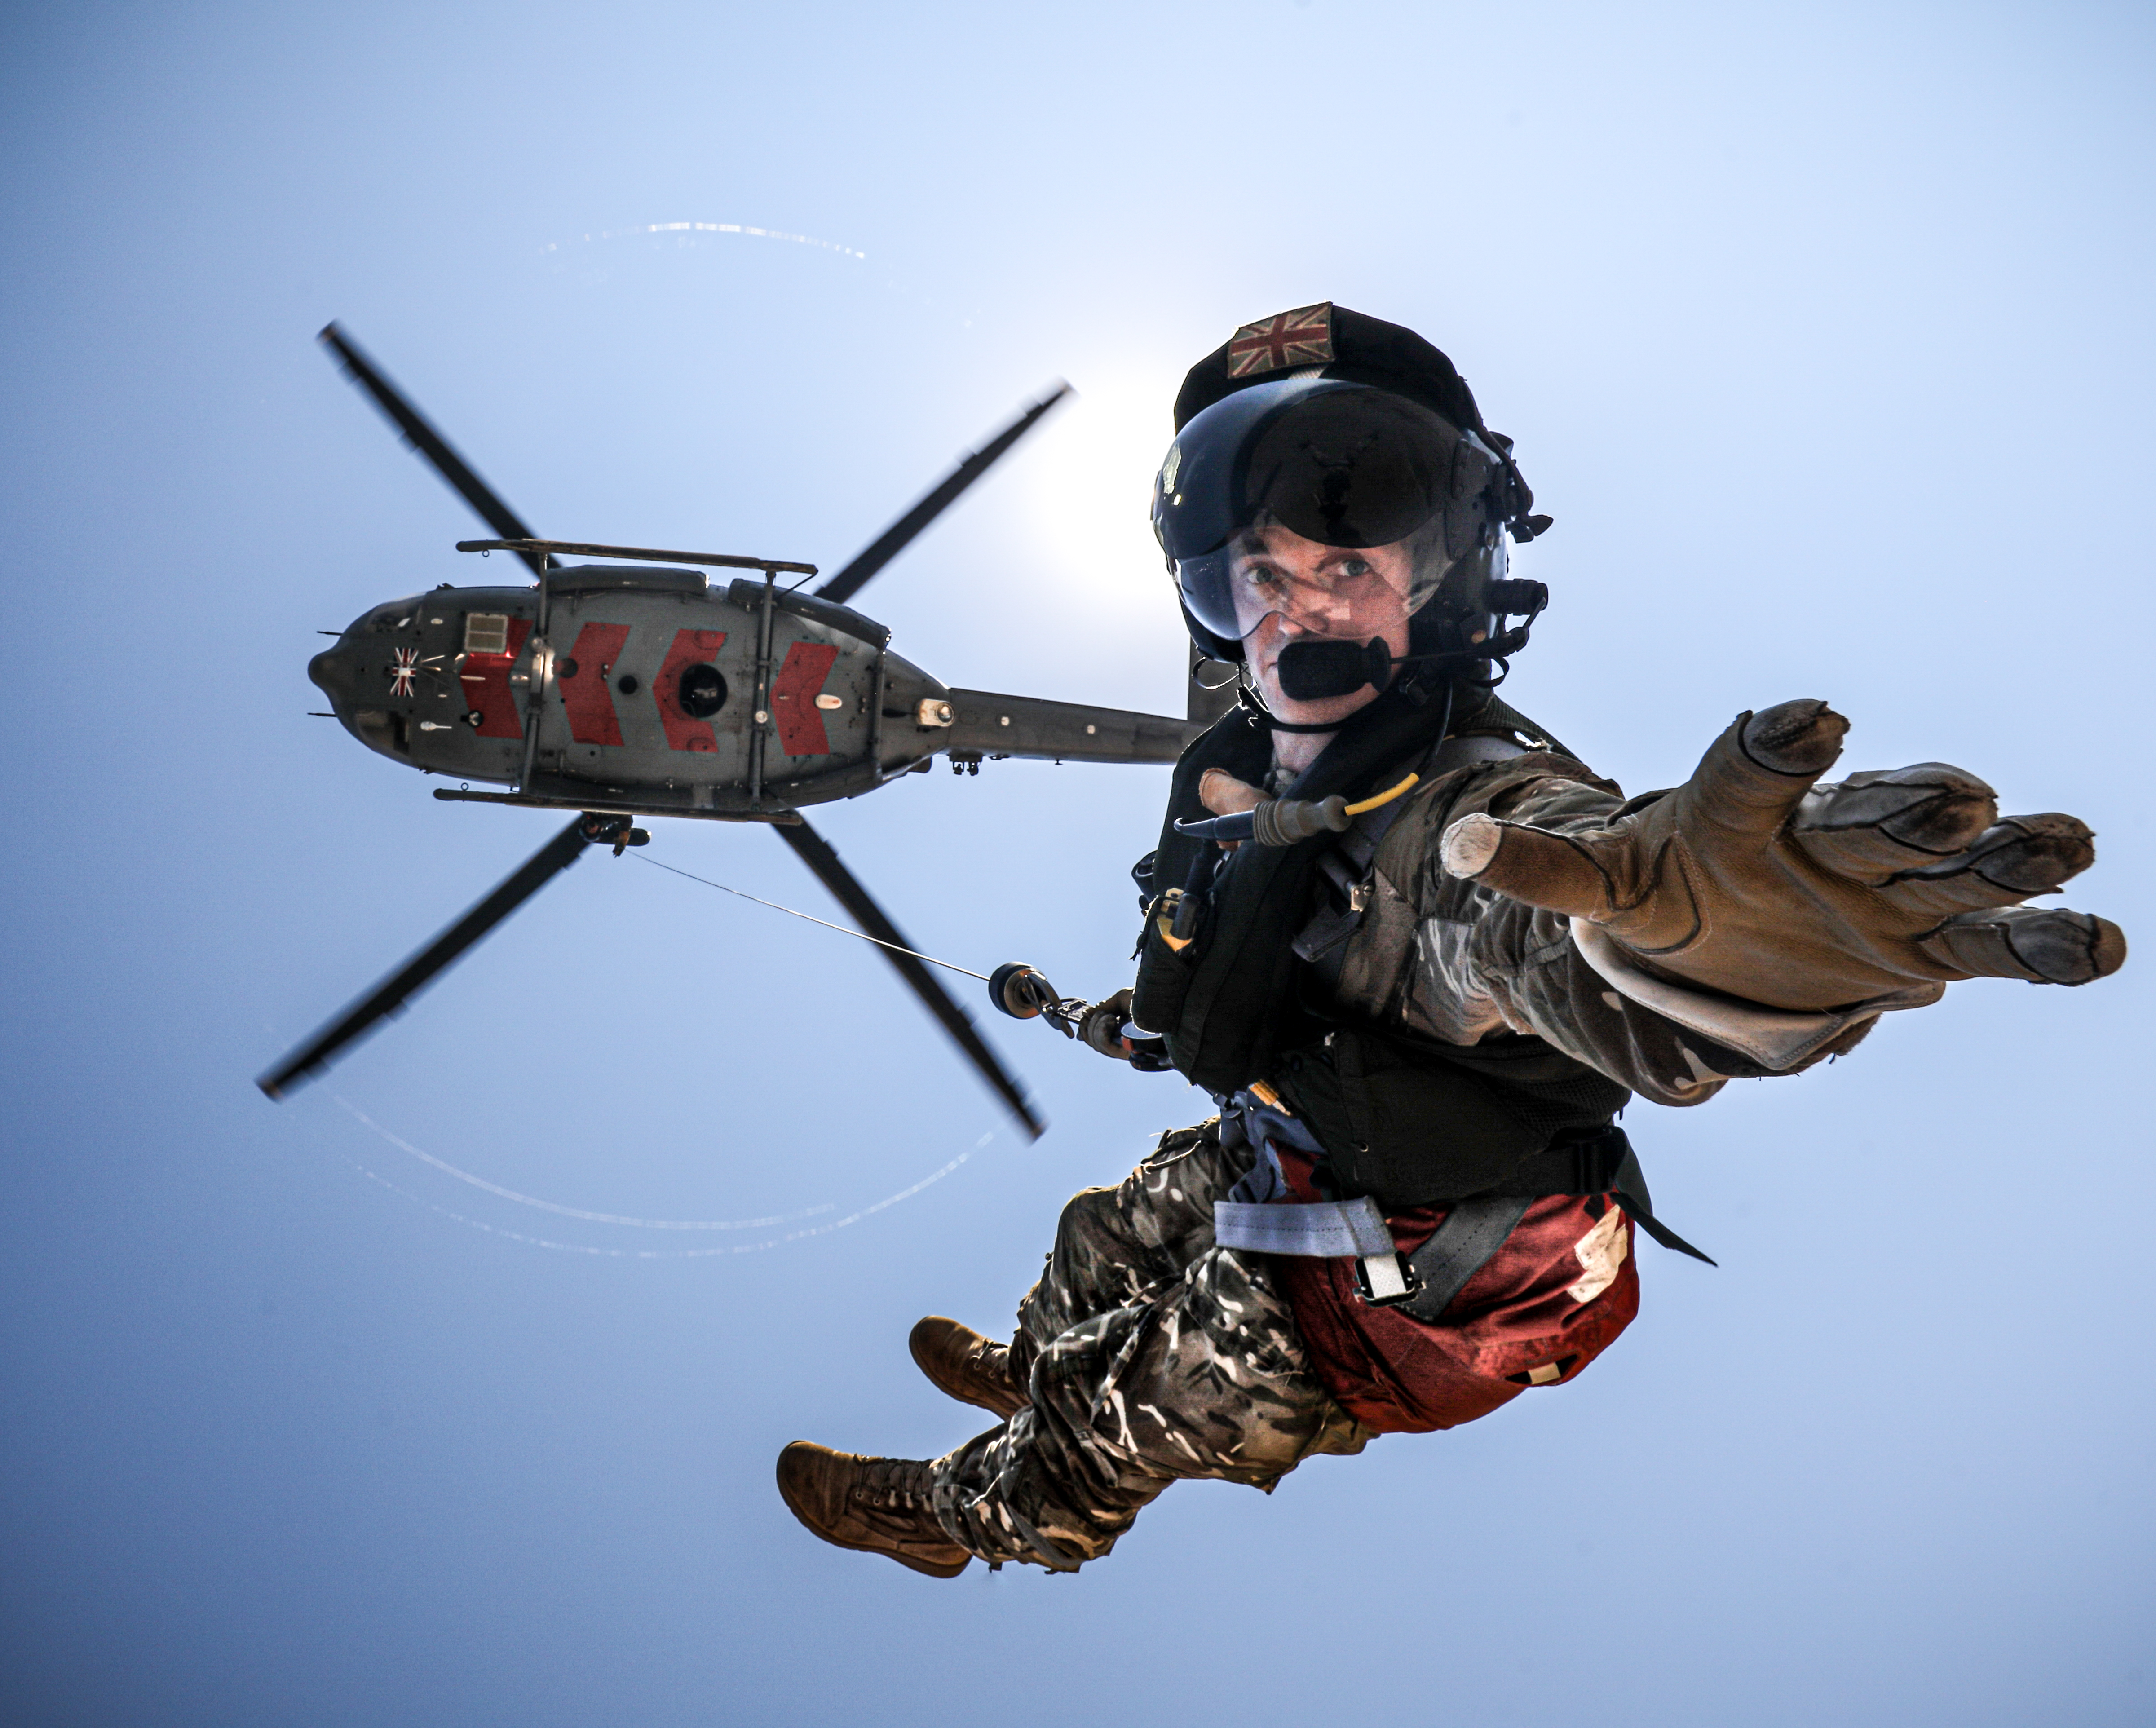 Image shows RAF aviator reaching towards camera as he repels down from helicopter.